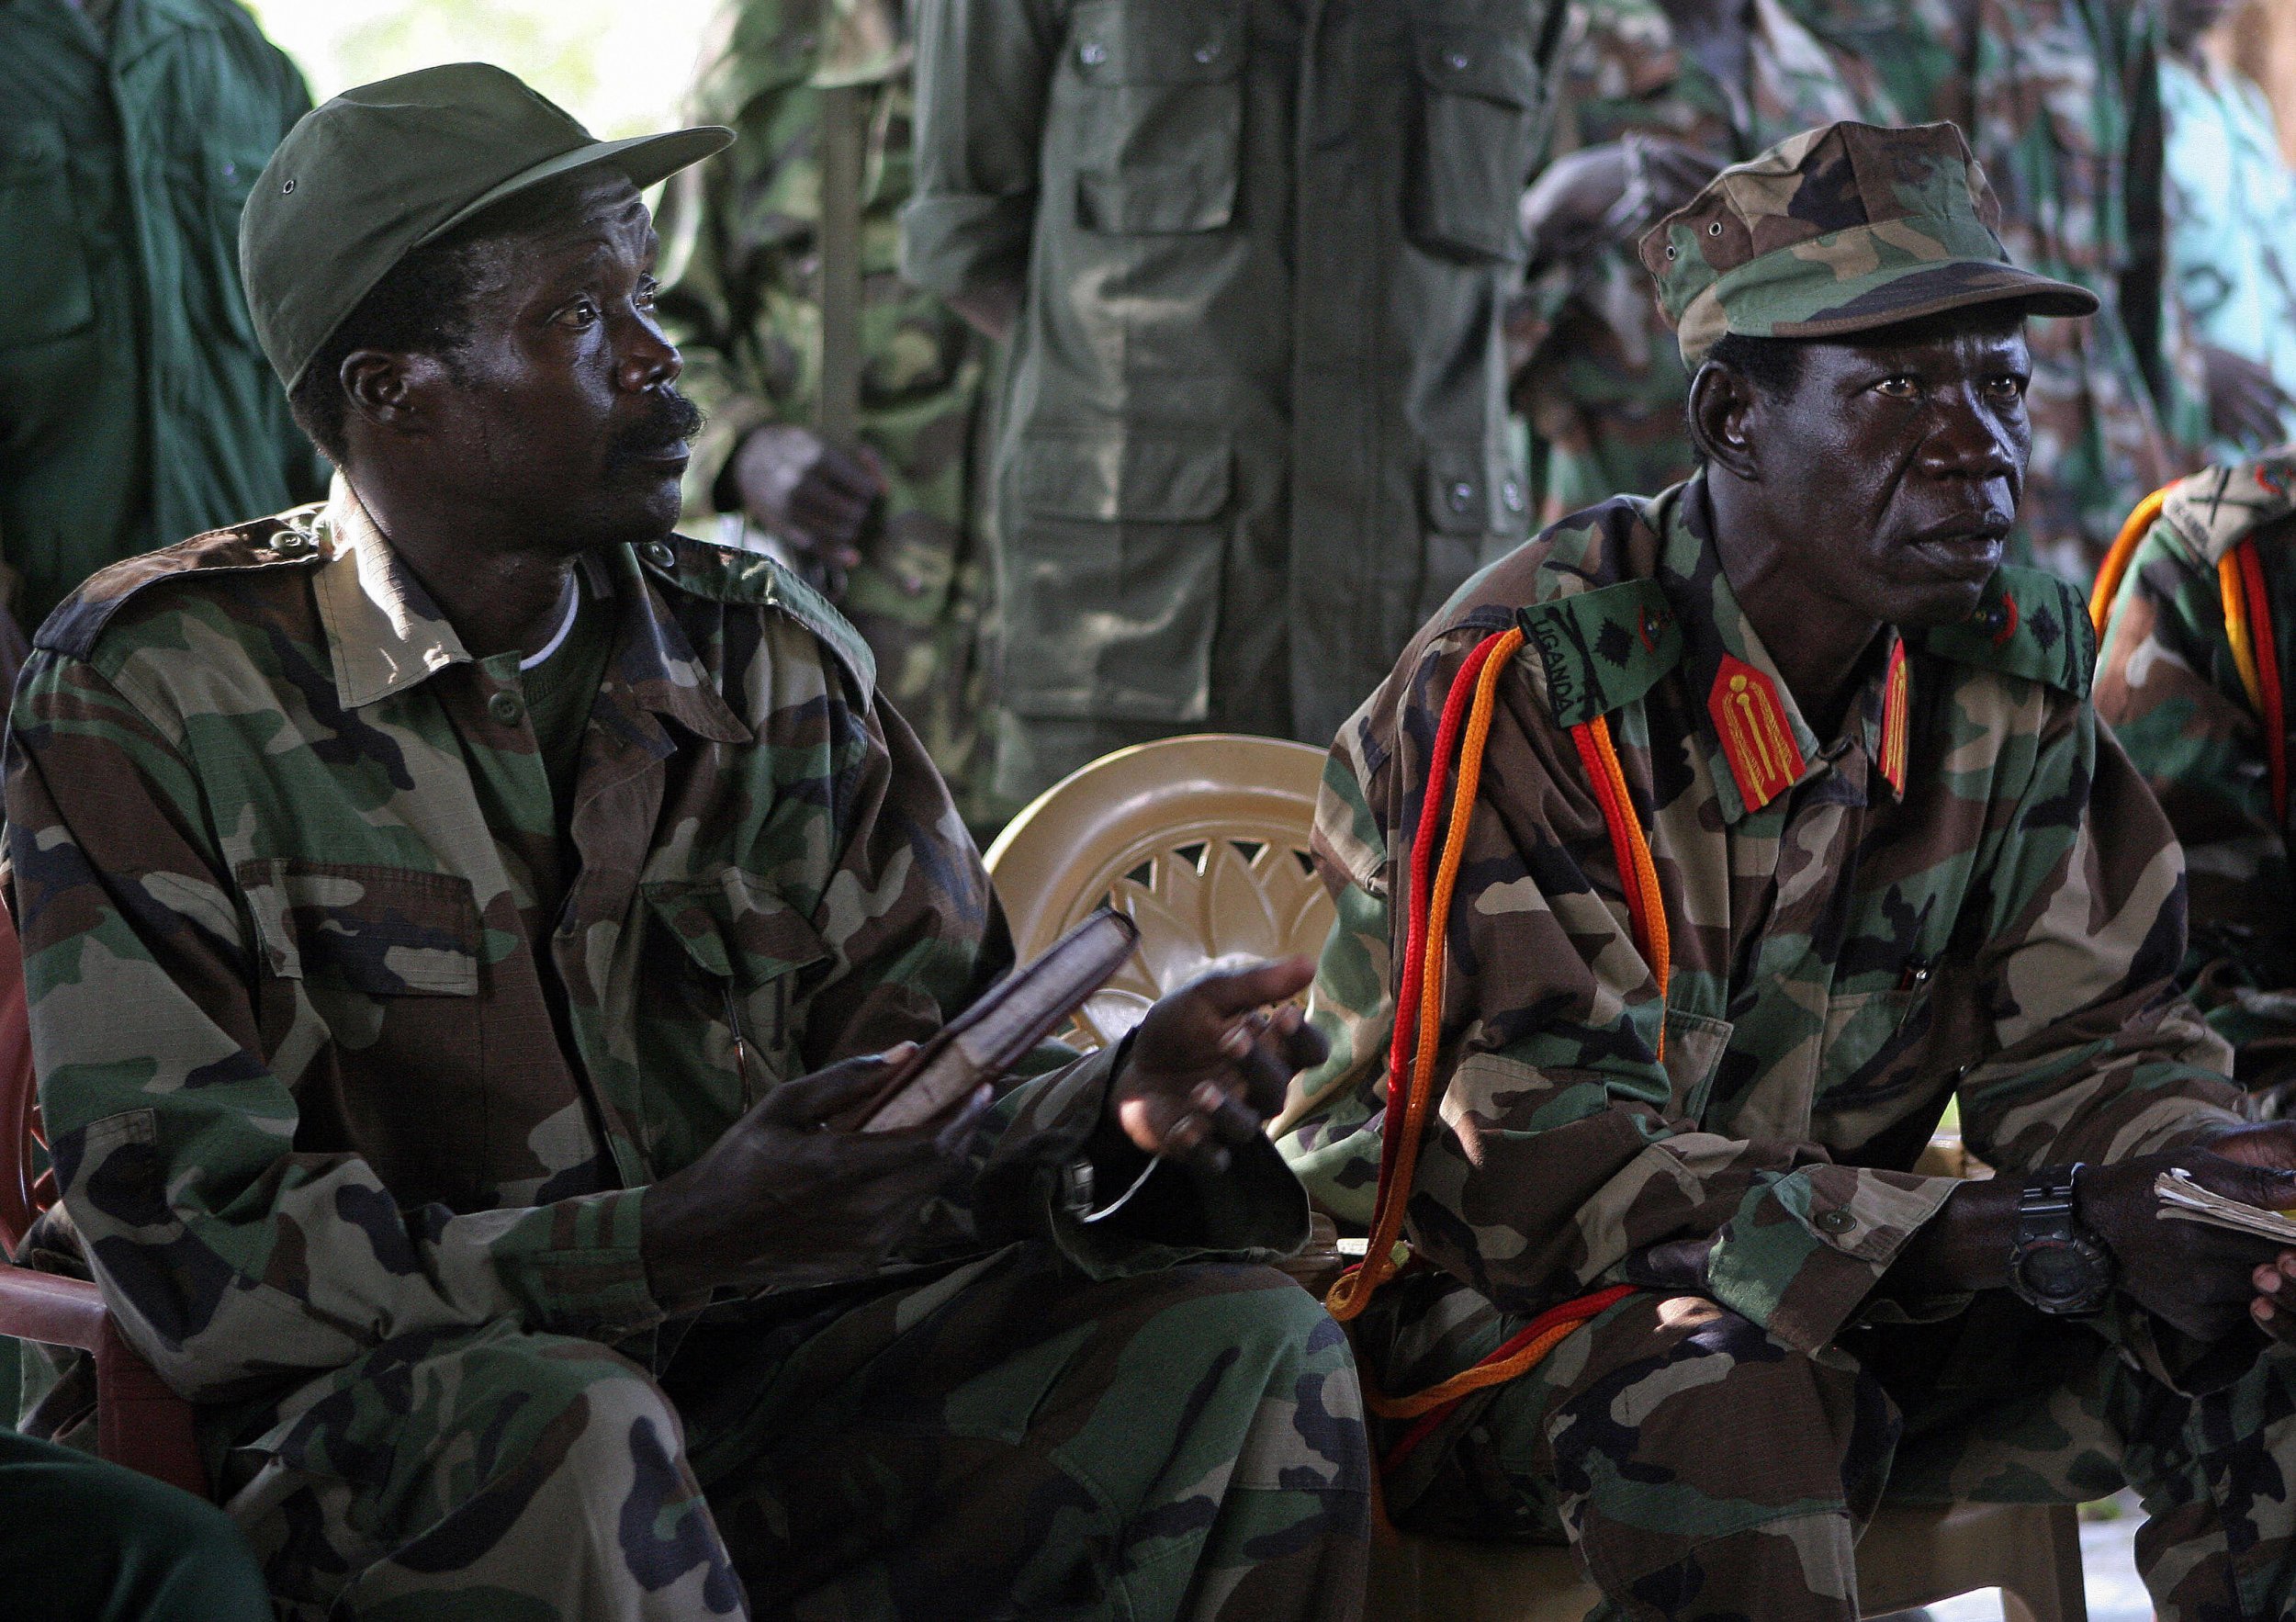 Lord's Resistance Army leader Joseph Kony sits at a meeting with a U.N. representative.